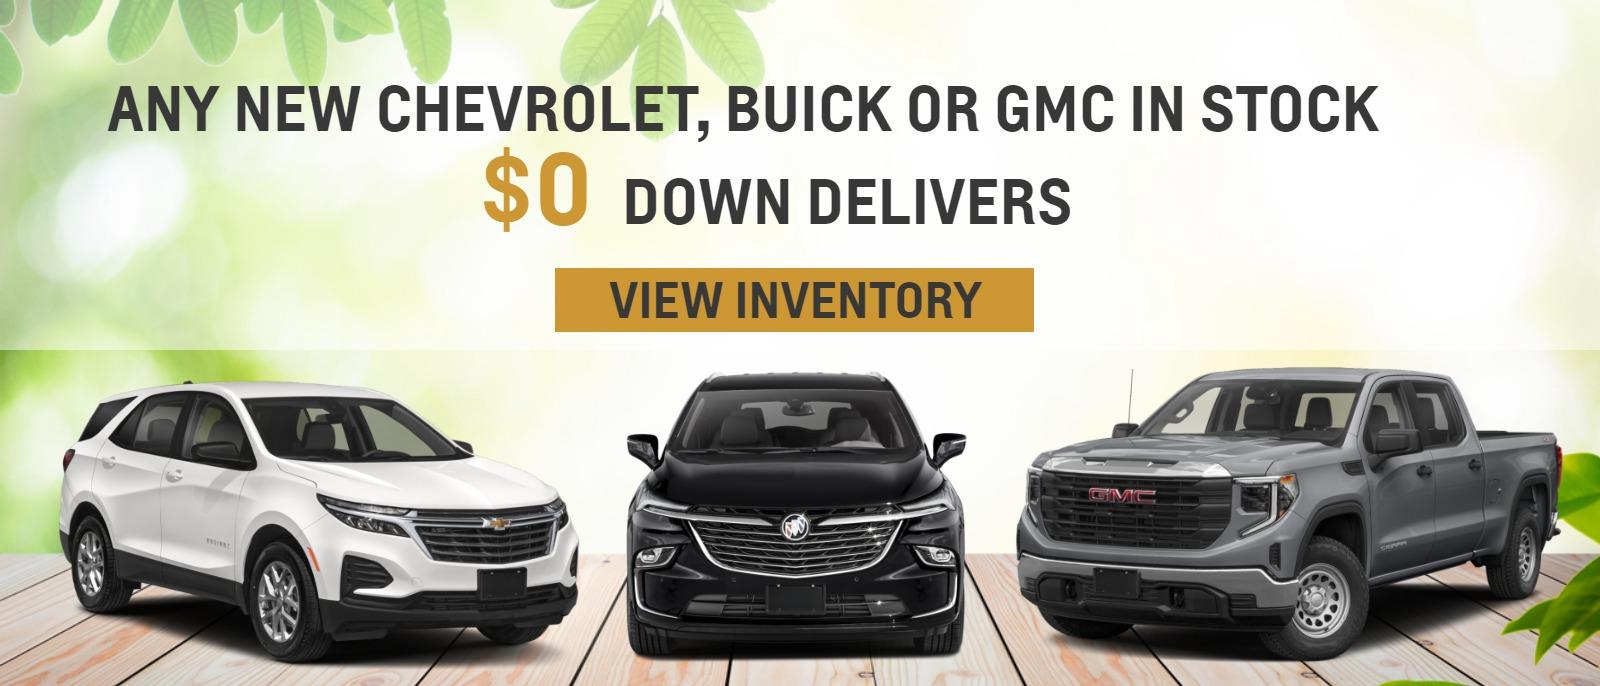 Any new Chevrolet, Buick or GMC in stock


$0 Down Delivers